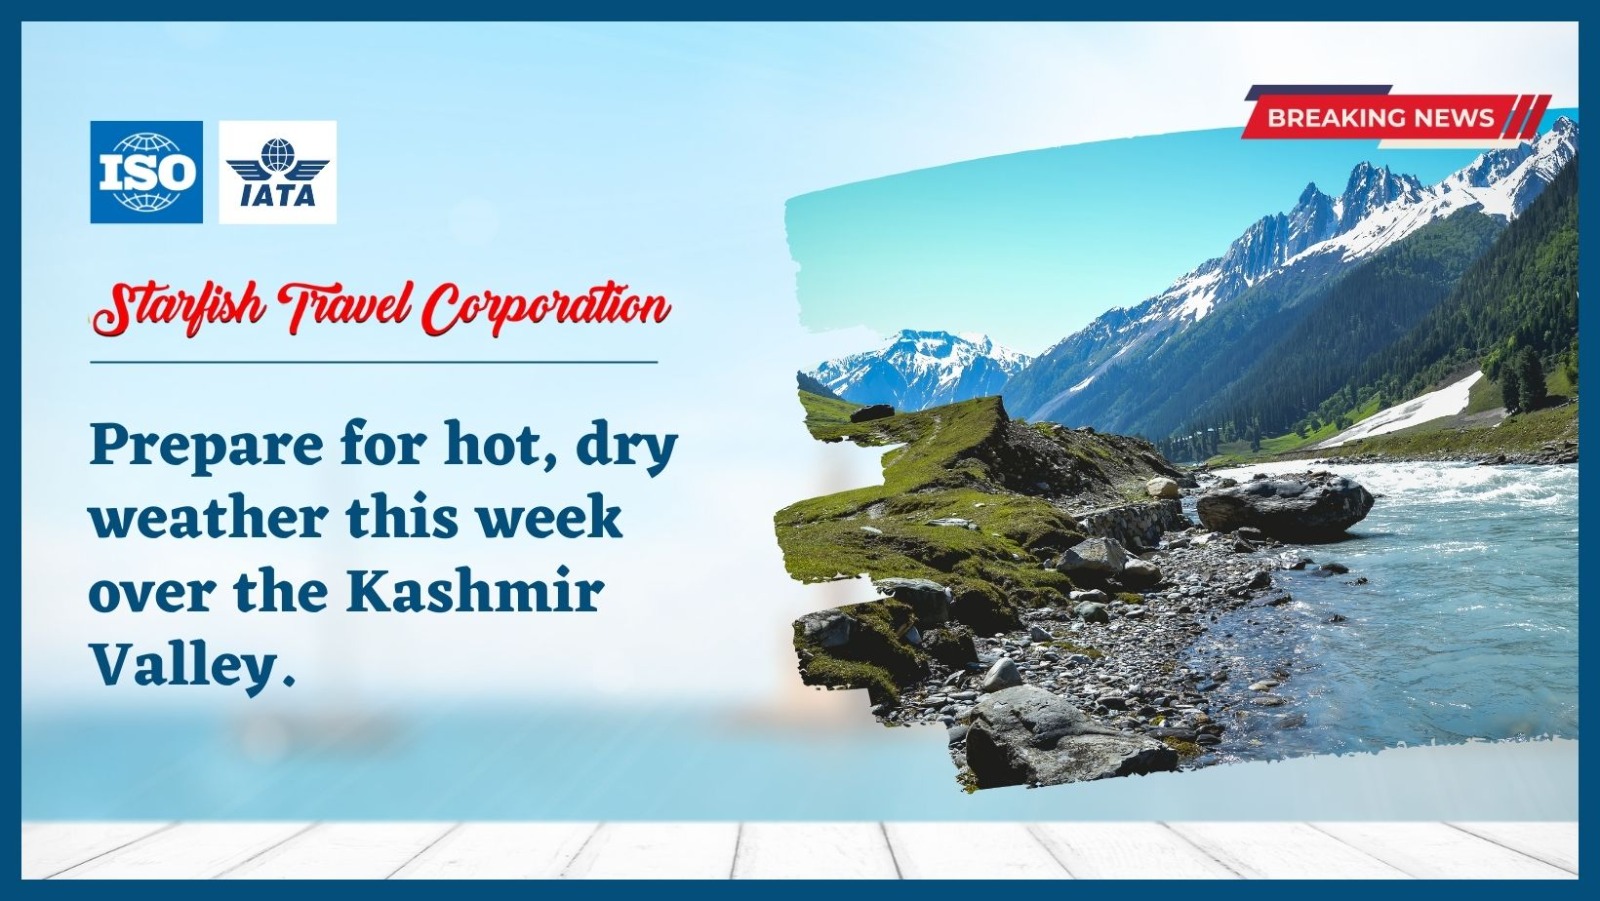 Prepare for hot, dry weather this week over the Kashmir Valley.